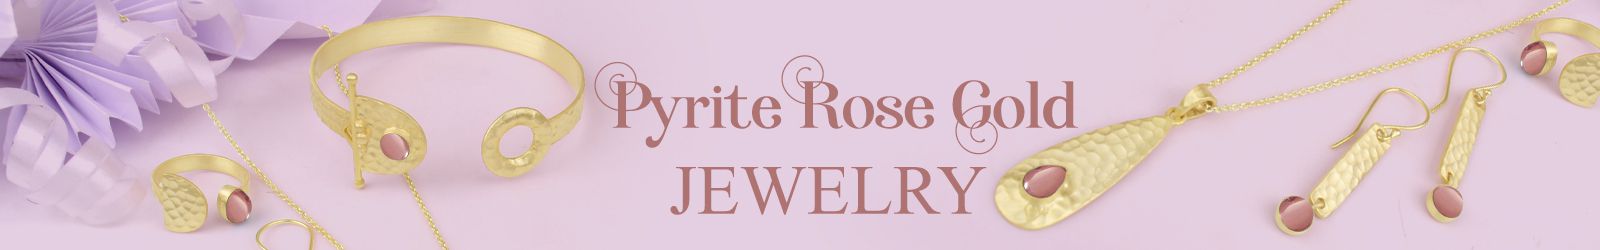 Silver Pyrite Rose Gold Jewelry Wholesale Supplier